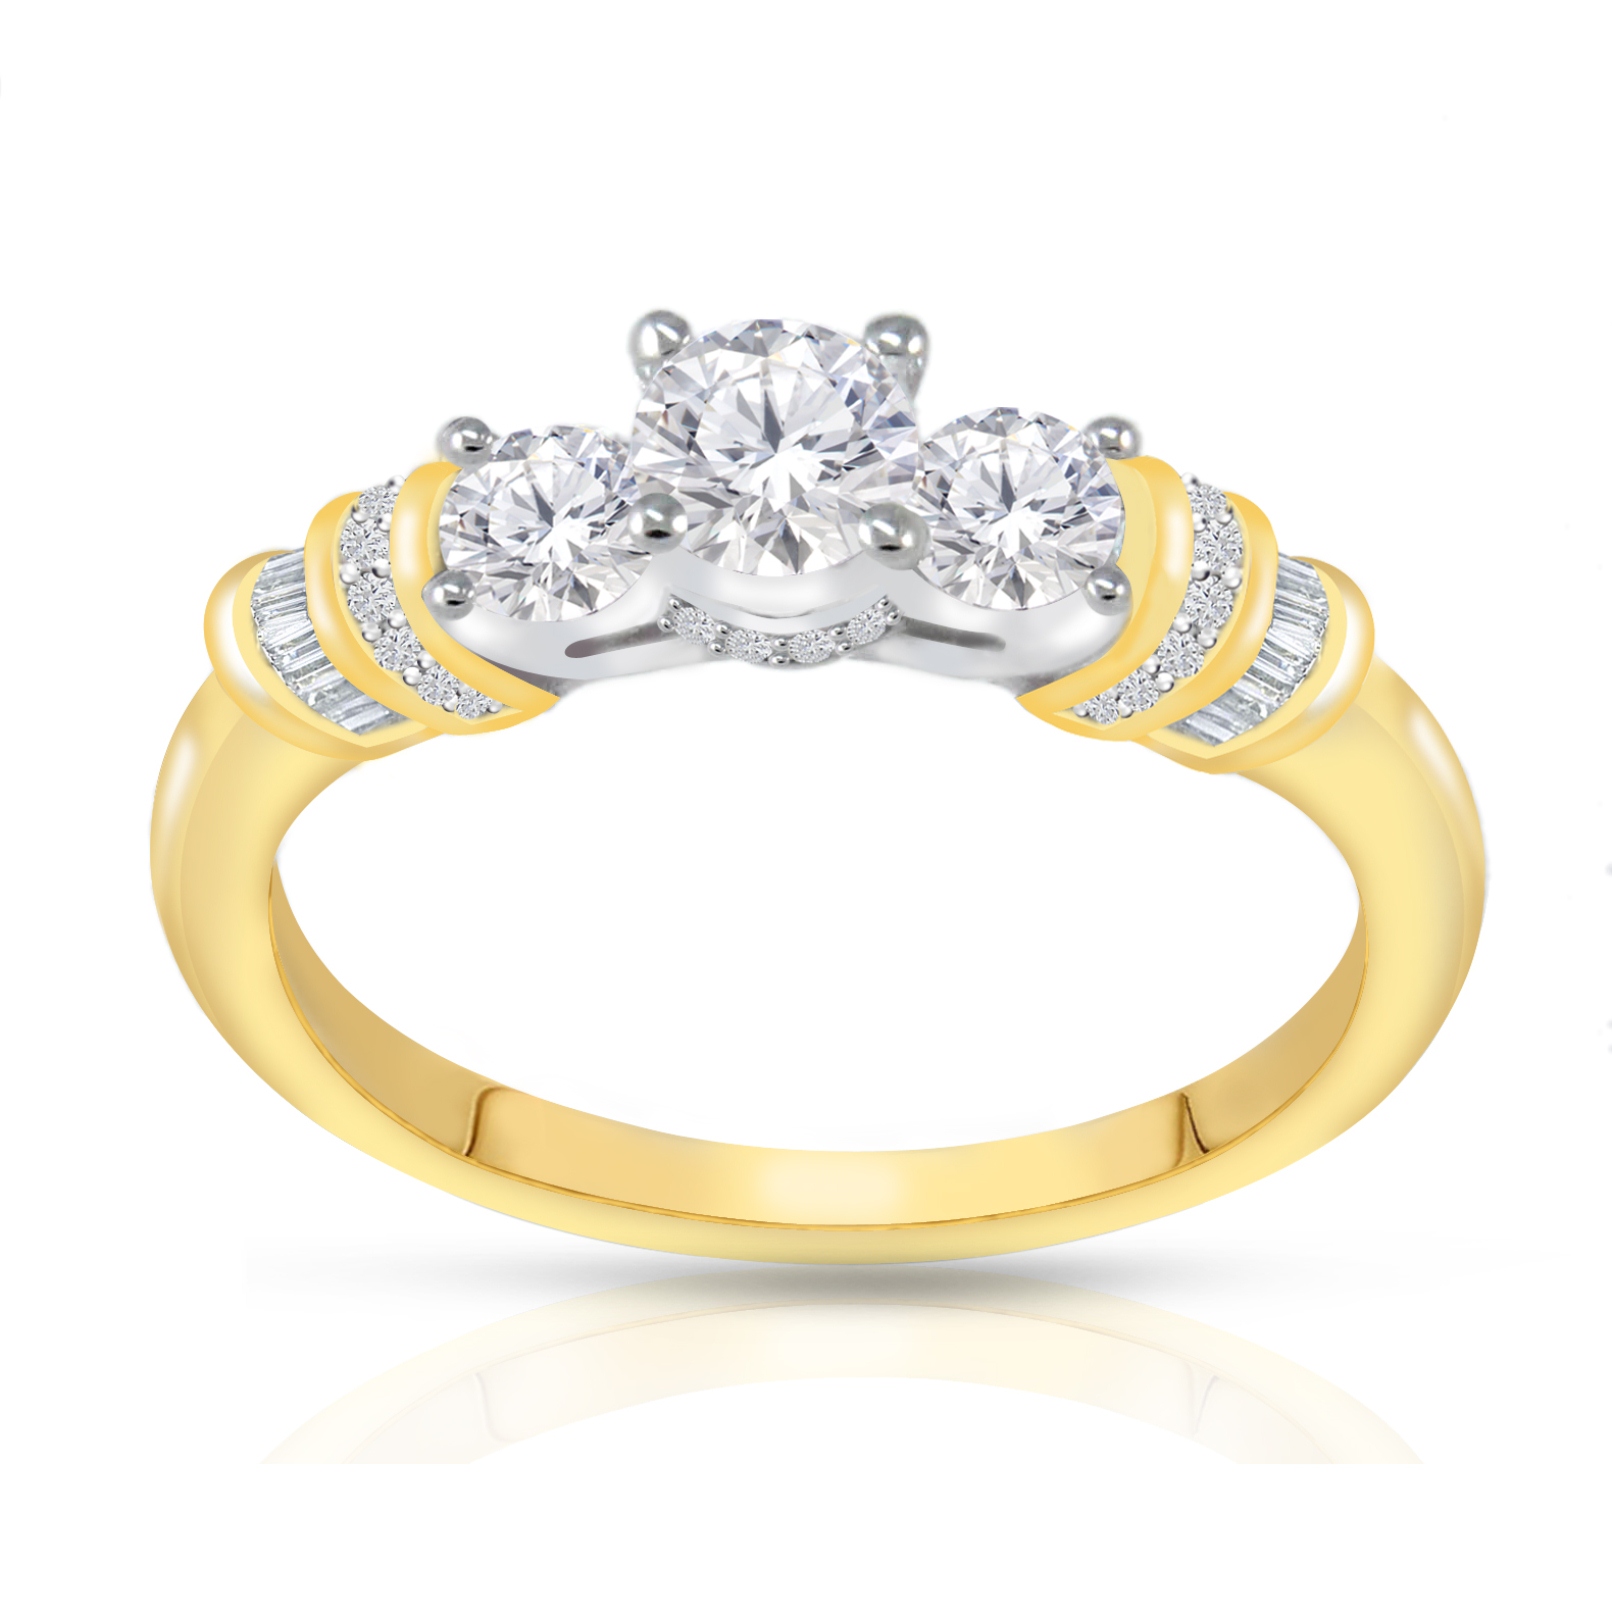 Tradition Diamond 10K Yellow Gold 1.00 CTTW Certified 3 Stones Ring